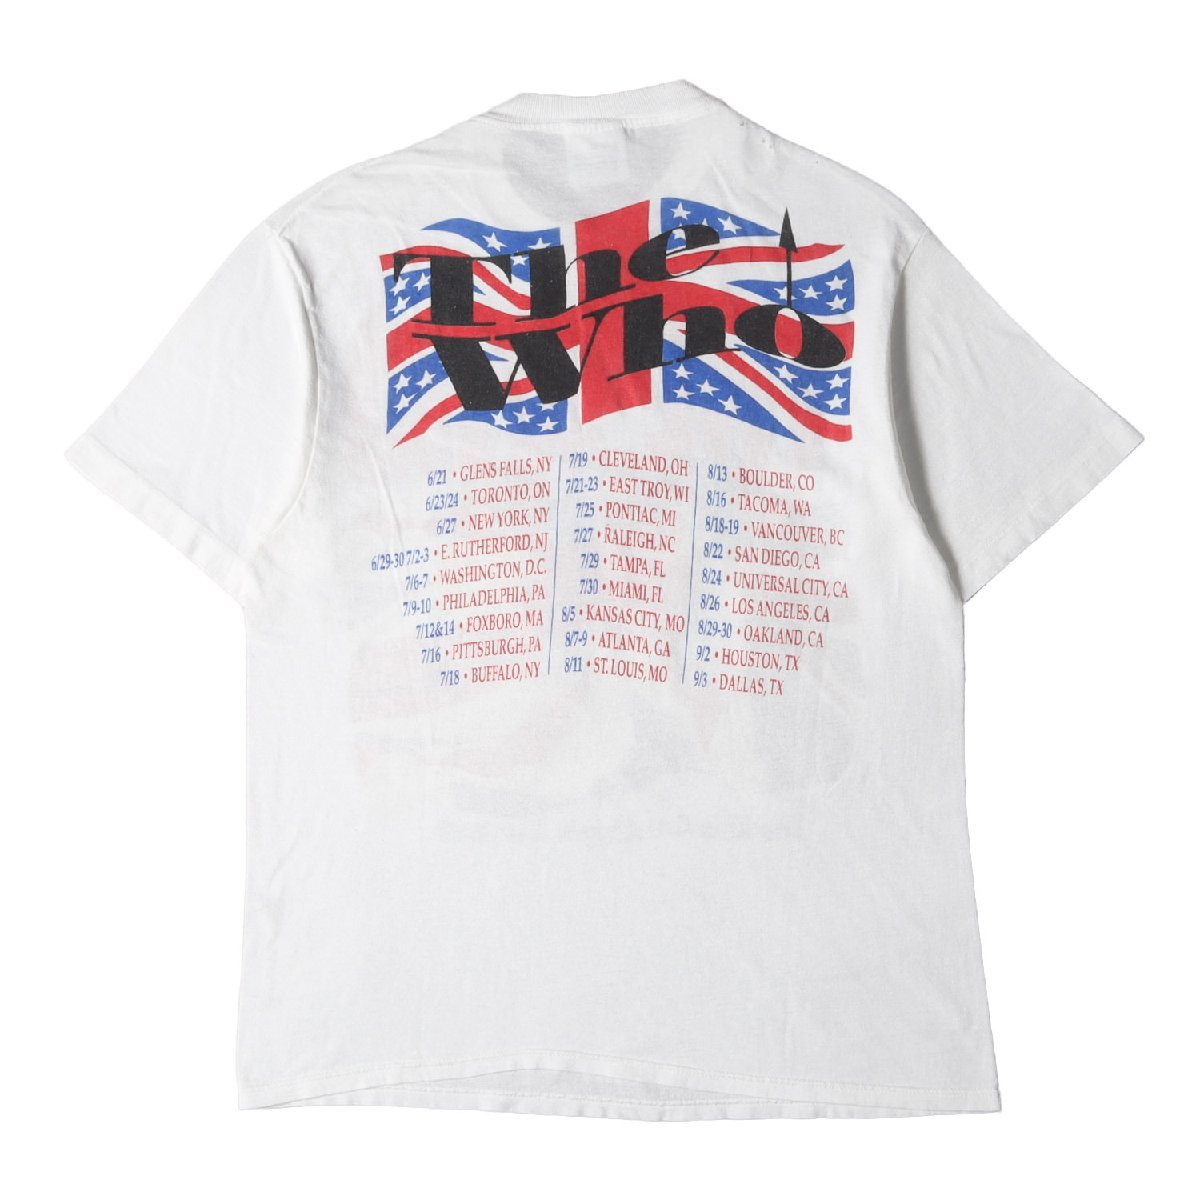 80s THE WHO The Kids Are Alright Tour 1989 Tシャツ Hanesボディ / USA製 ホワイト L 80年代 古着 トップス カットソー バンドT ロックT_画像2